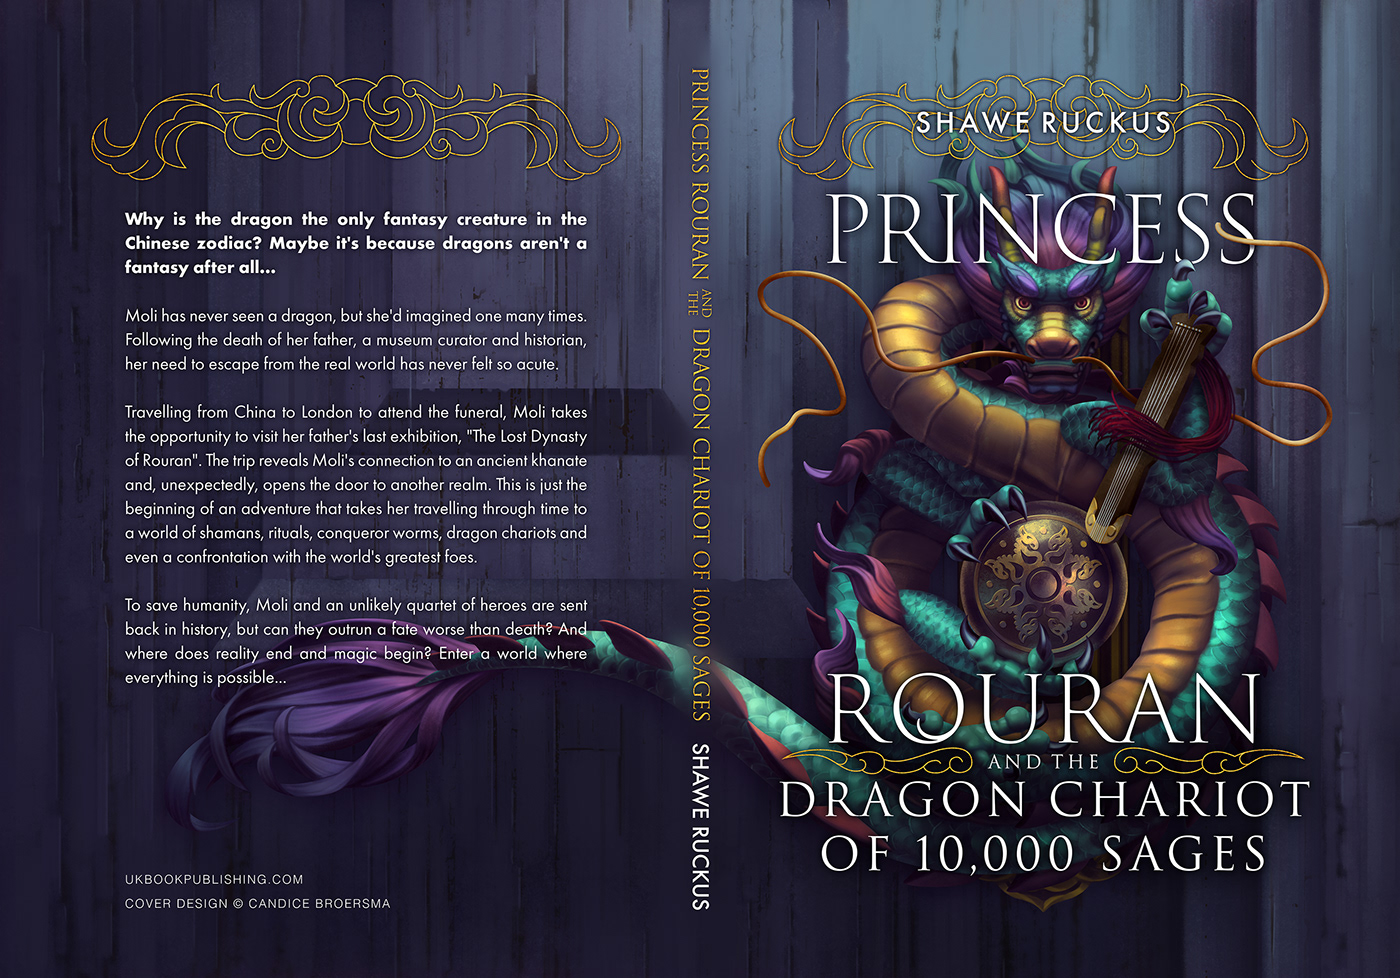 chinese dragon book cover Middle grade asian dragon book cover artist fantasy book YA book chinese mythology dragon artist dragon book